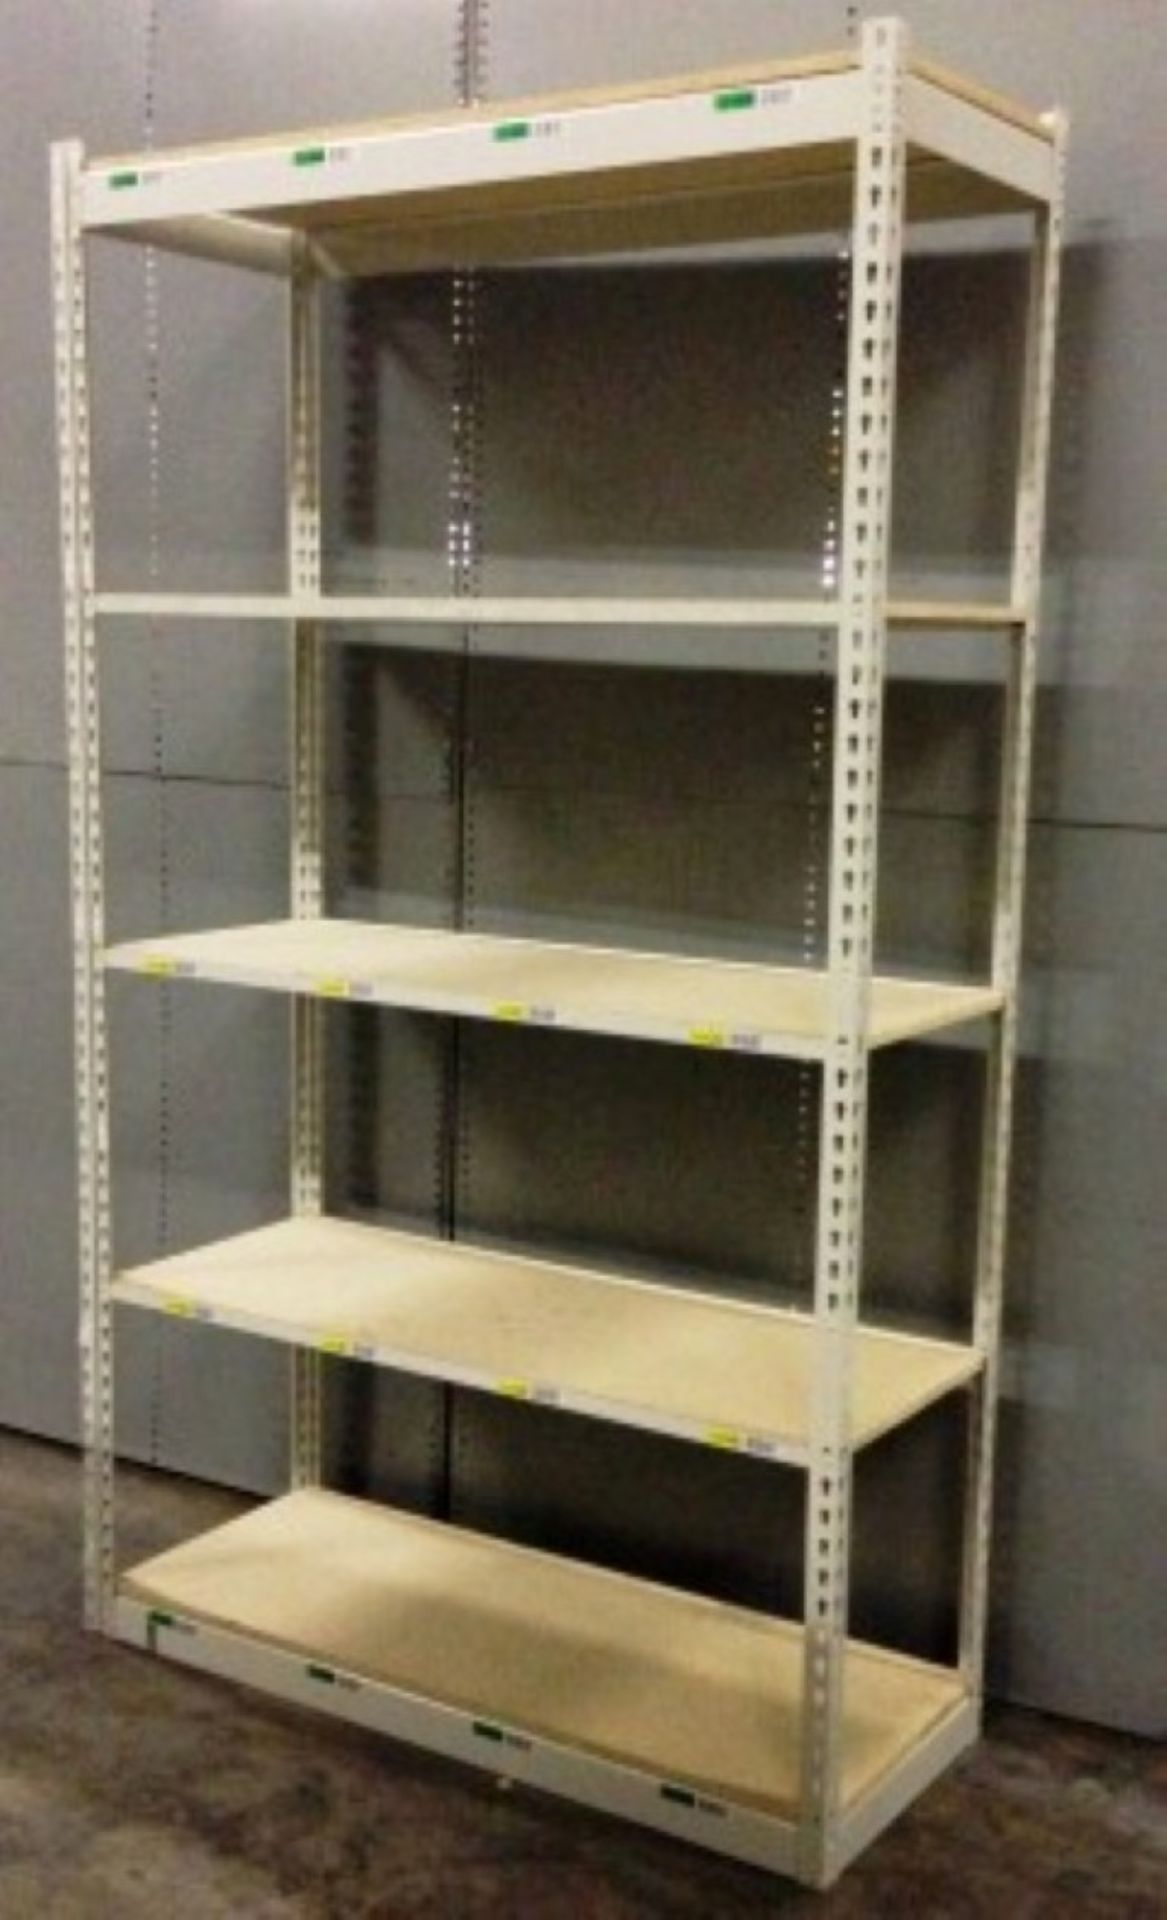 10 SECTIONS OF RIVETIER INDUSTRIAL SHELVING